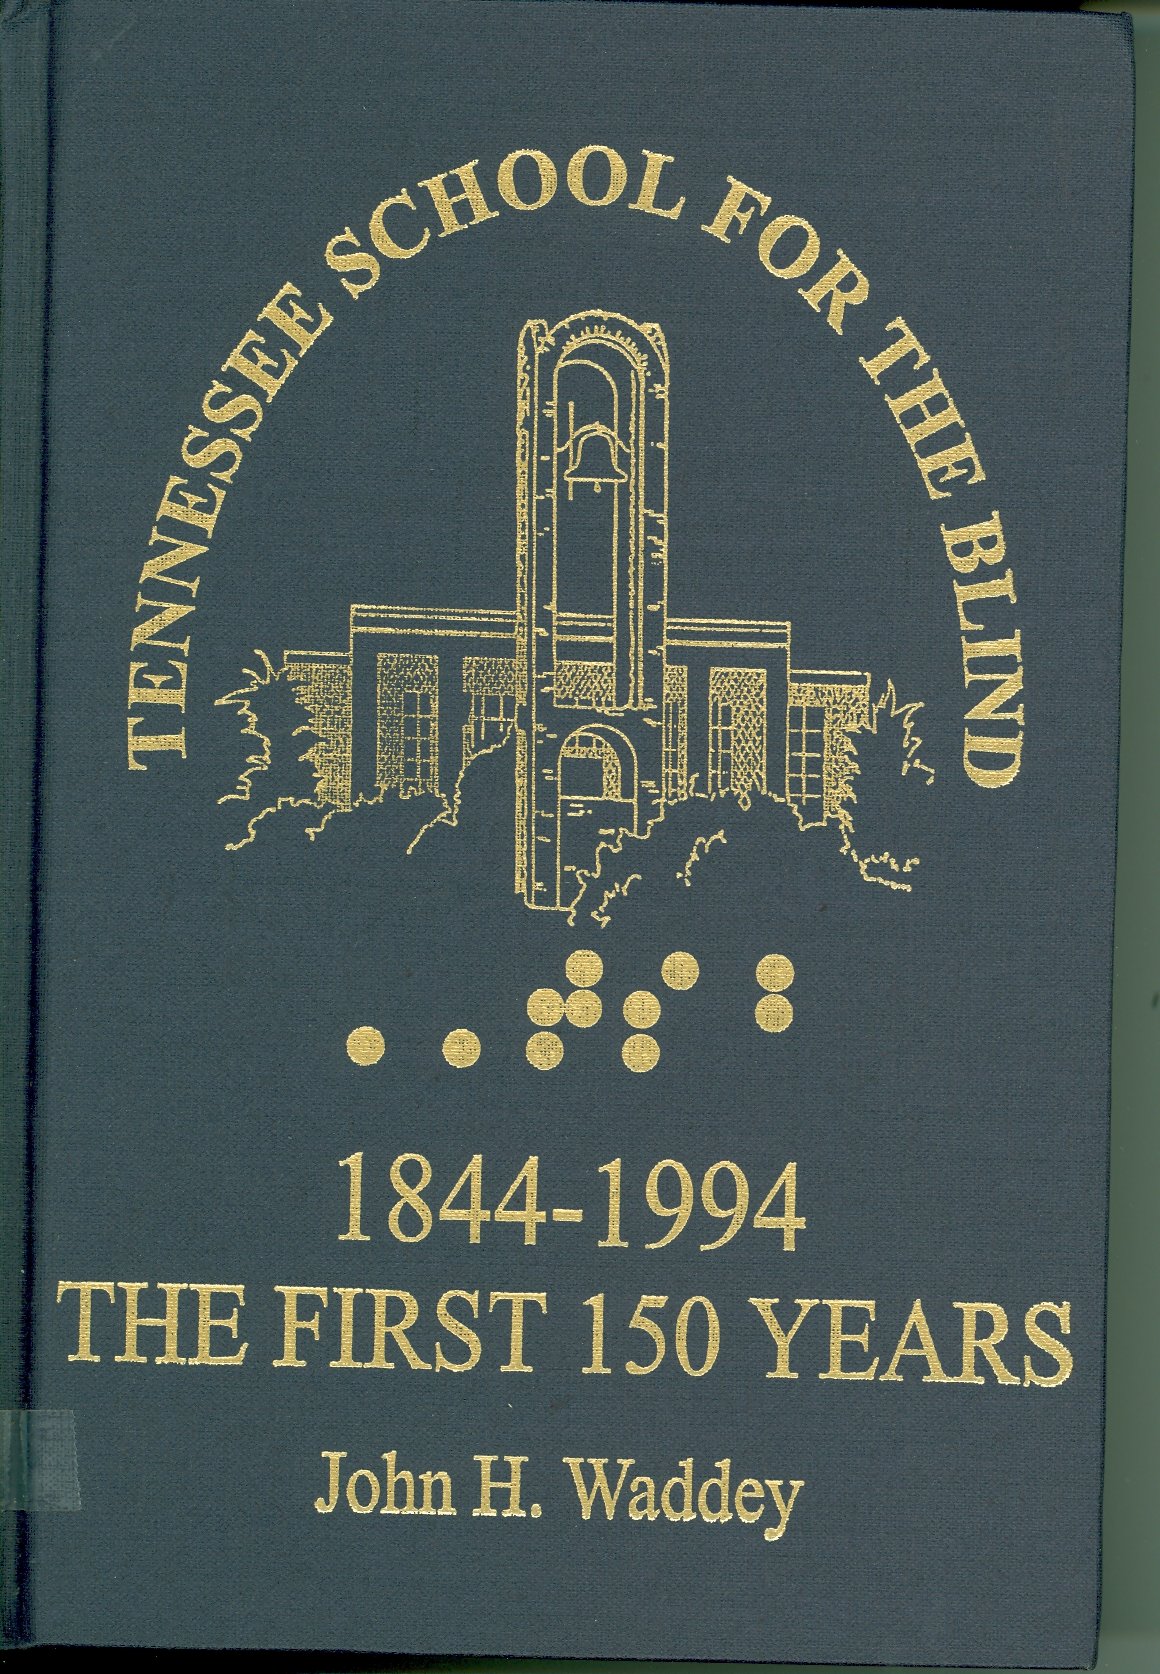 Tennessee School for the Blind: The First 150 Years-1